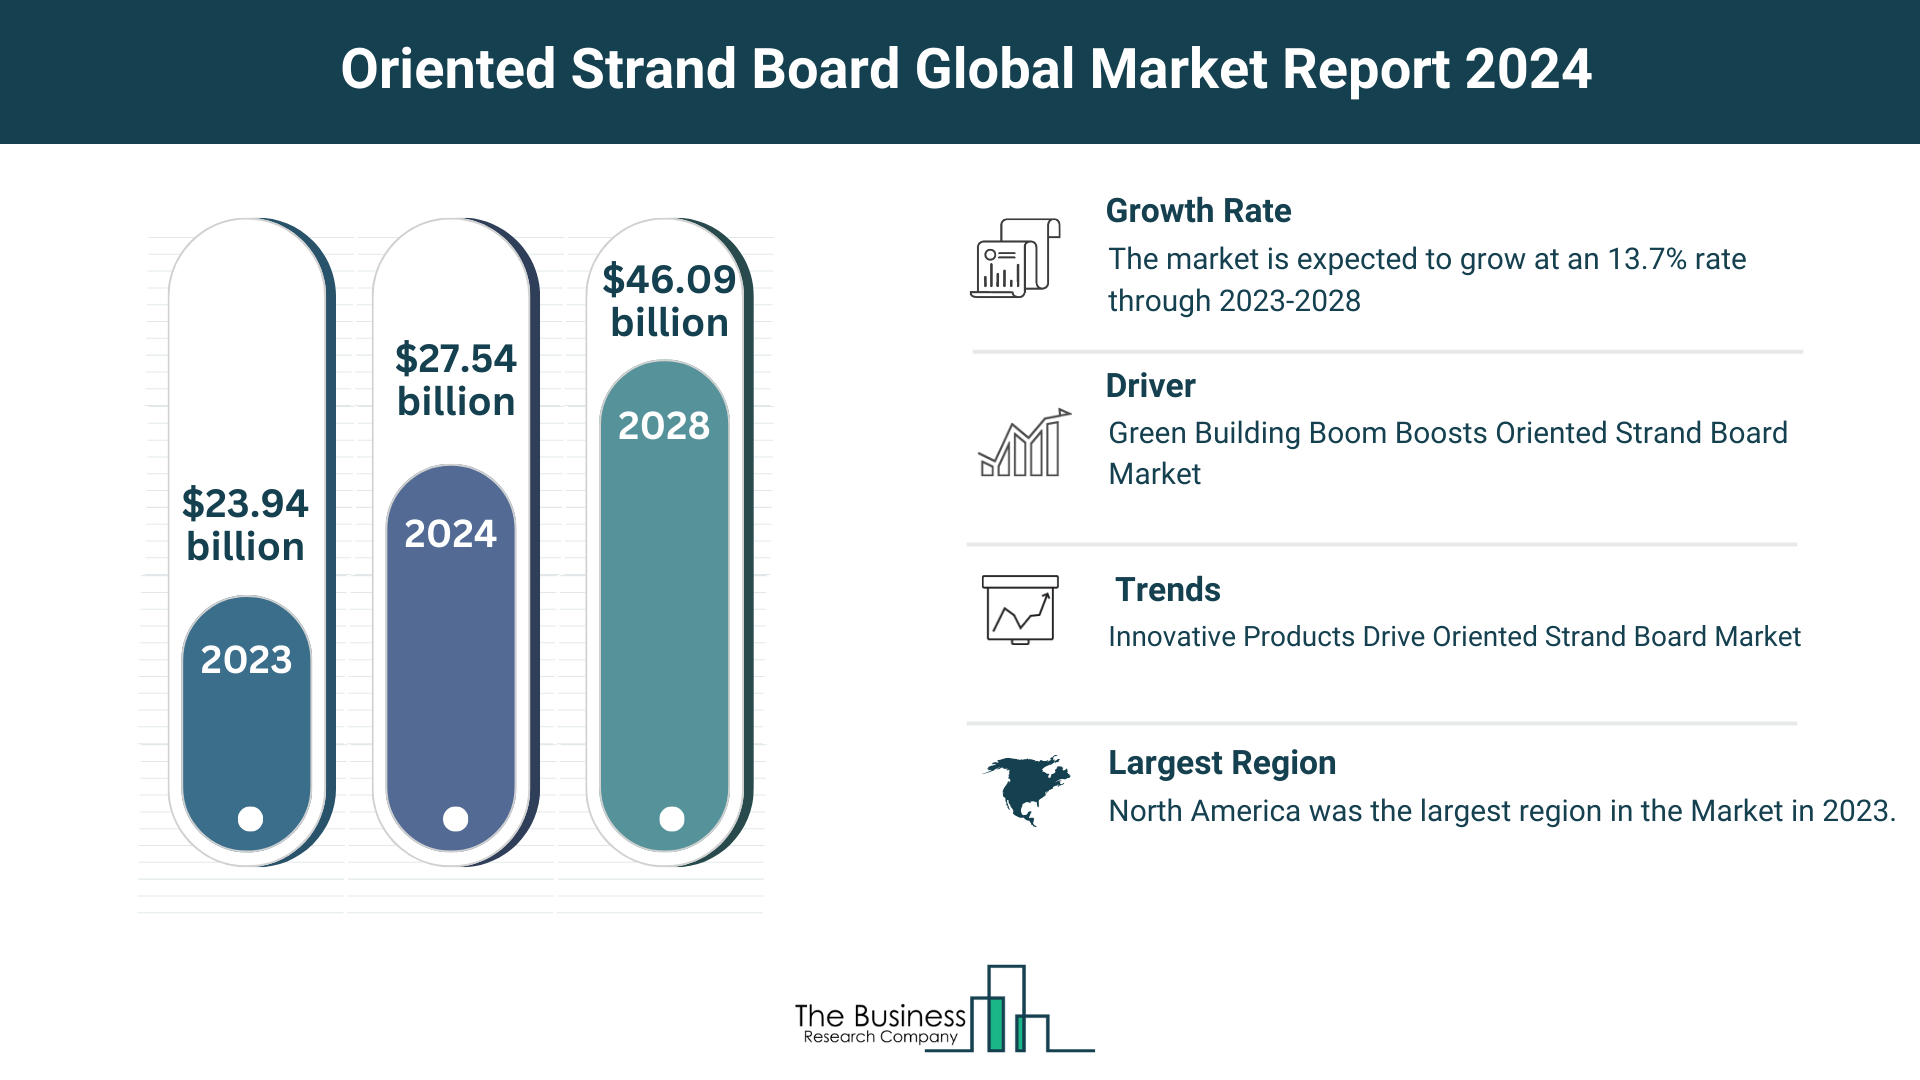 What Are The 5 Top Insights From The Oriented Strand Board Market Forecast 2024